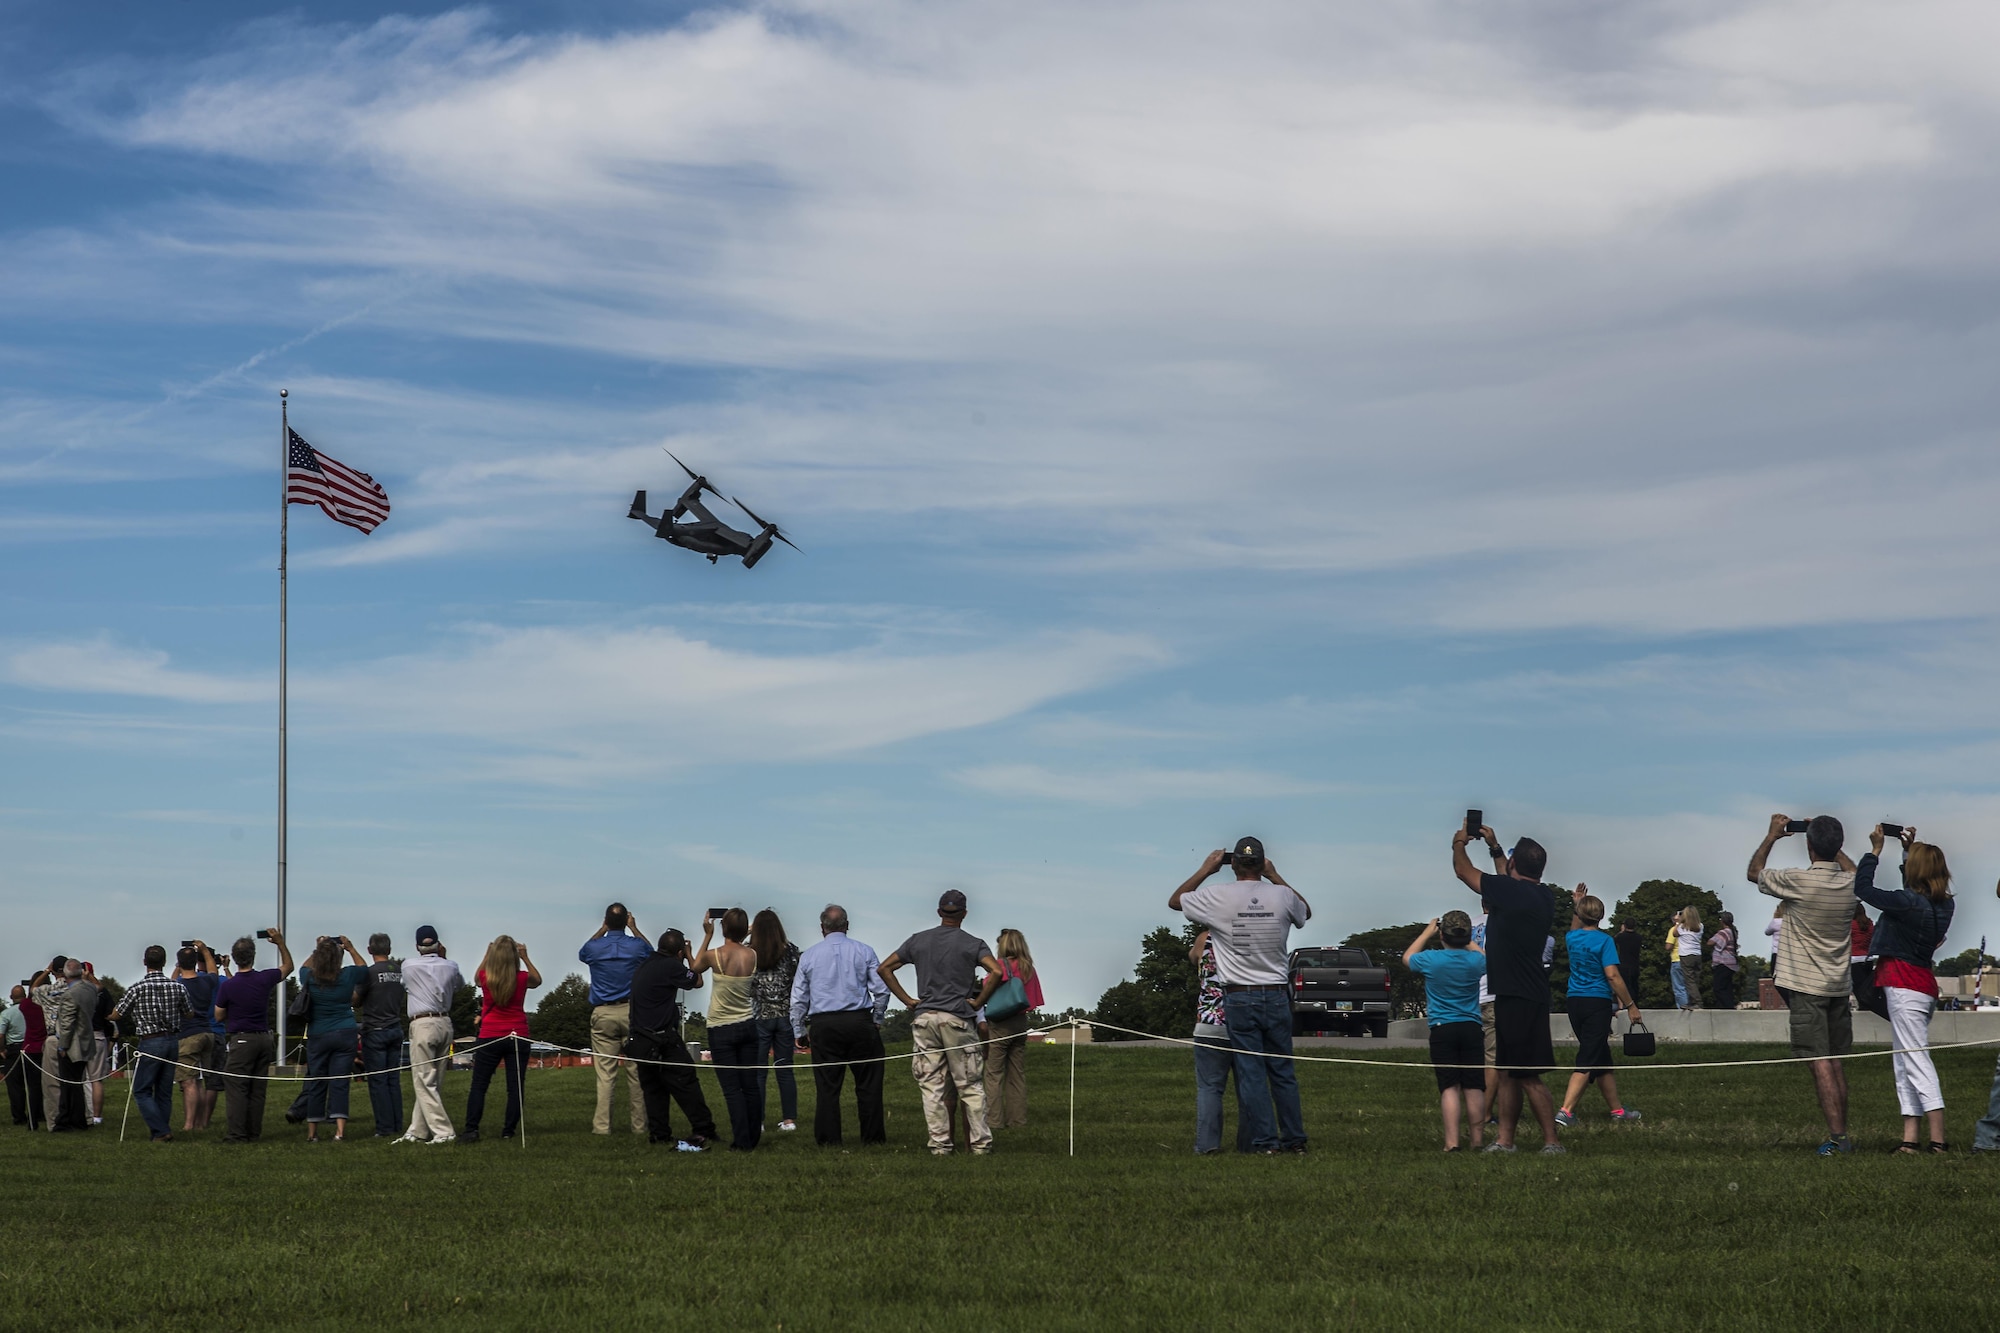 A CV-22 Osprey aircraft assigned to the 20th Special Operations Squadron at Cannon Air Force Base, N.M., provides a fly over for the public after the Green Hornet Dedication ceremony at the National Museum of the United States Air Force near Wright-Patterson Air Force Base, Ohio, Sept. 15, 2016. The aircraft landed at the museum in tribute to the Green Hornets. (U.S. Air Force photo by Senior Airman Luke Kitterman/Released)